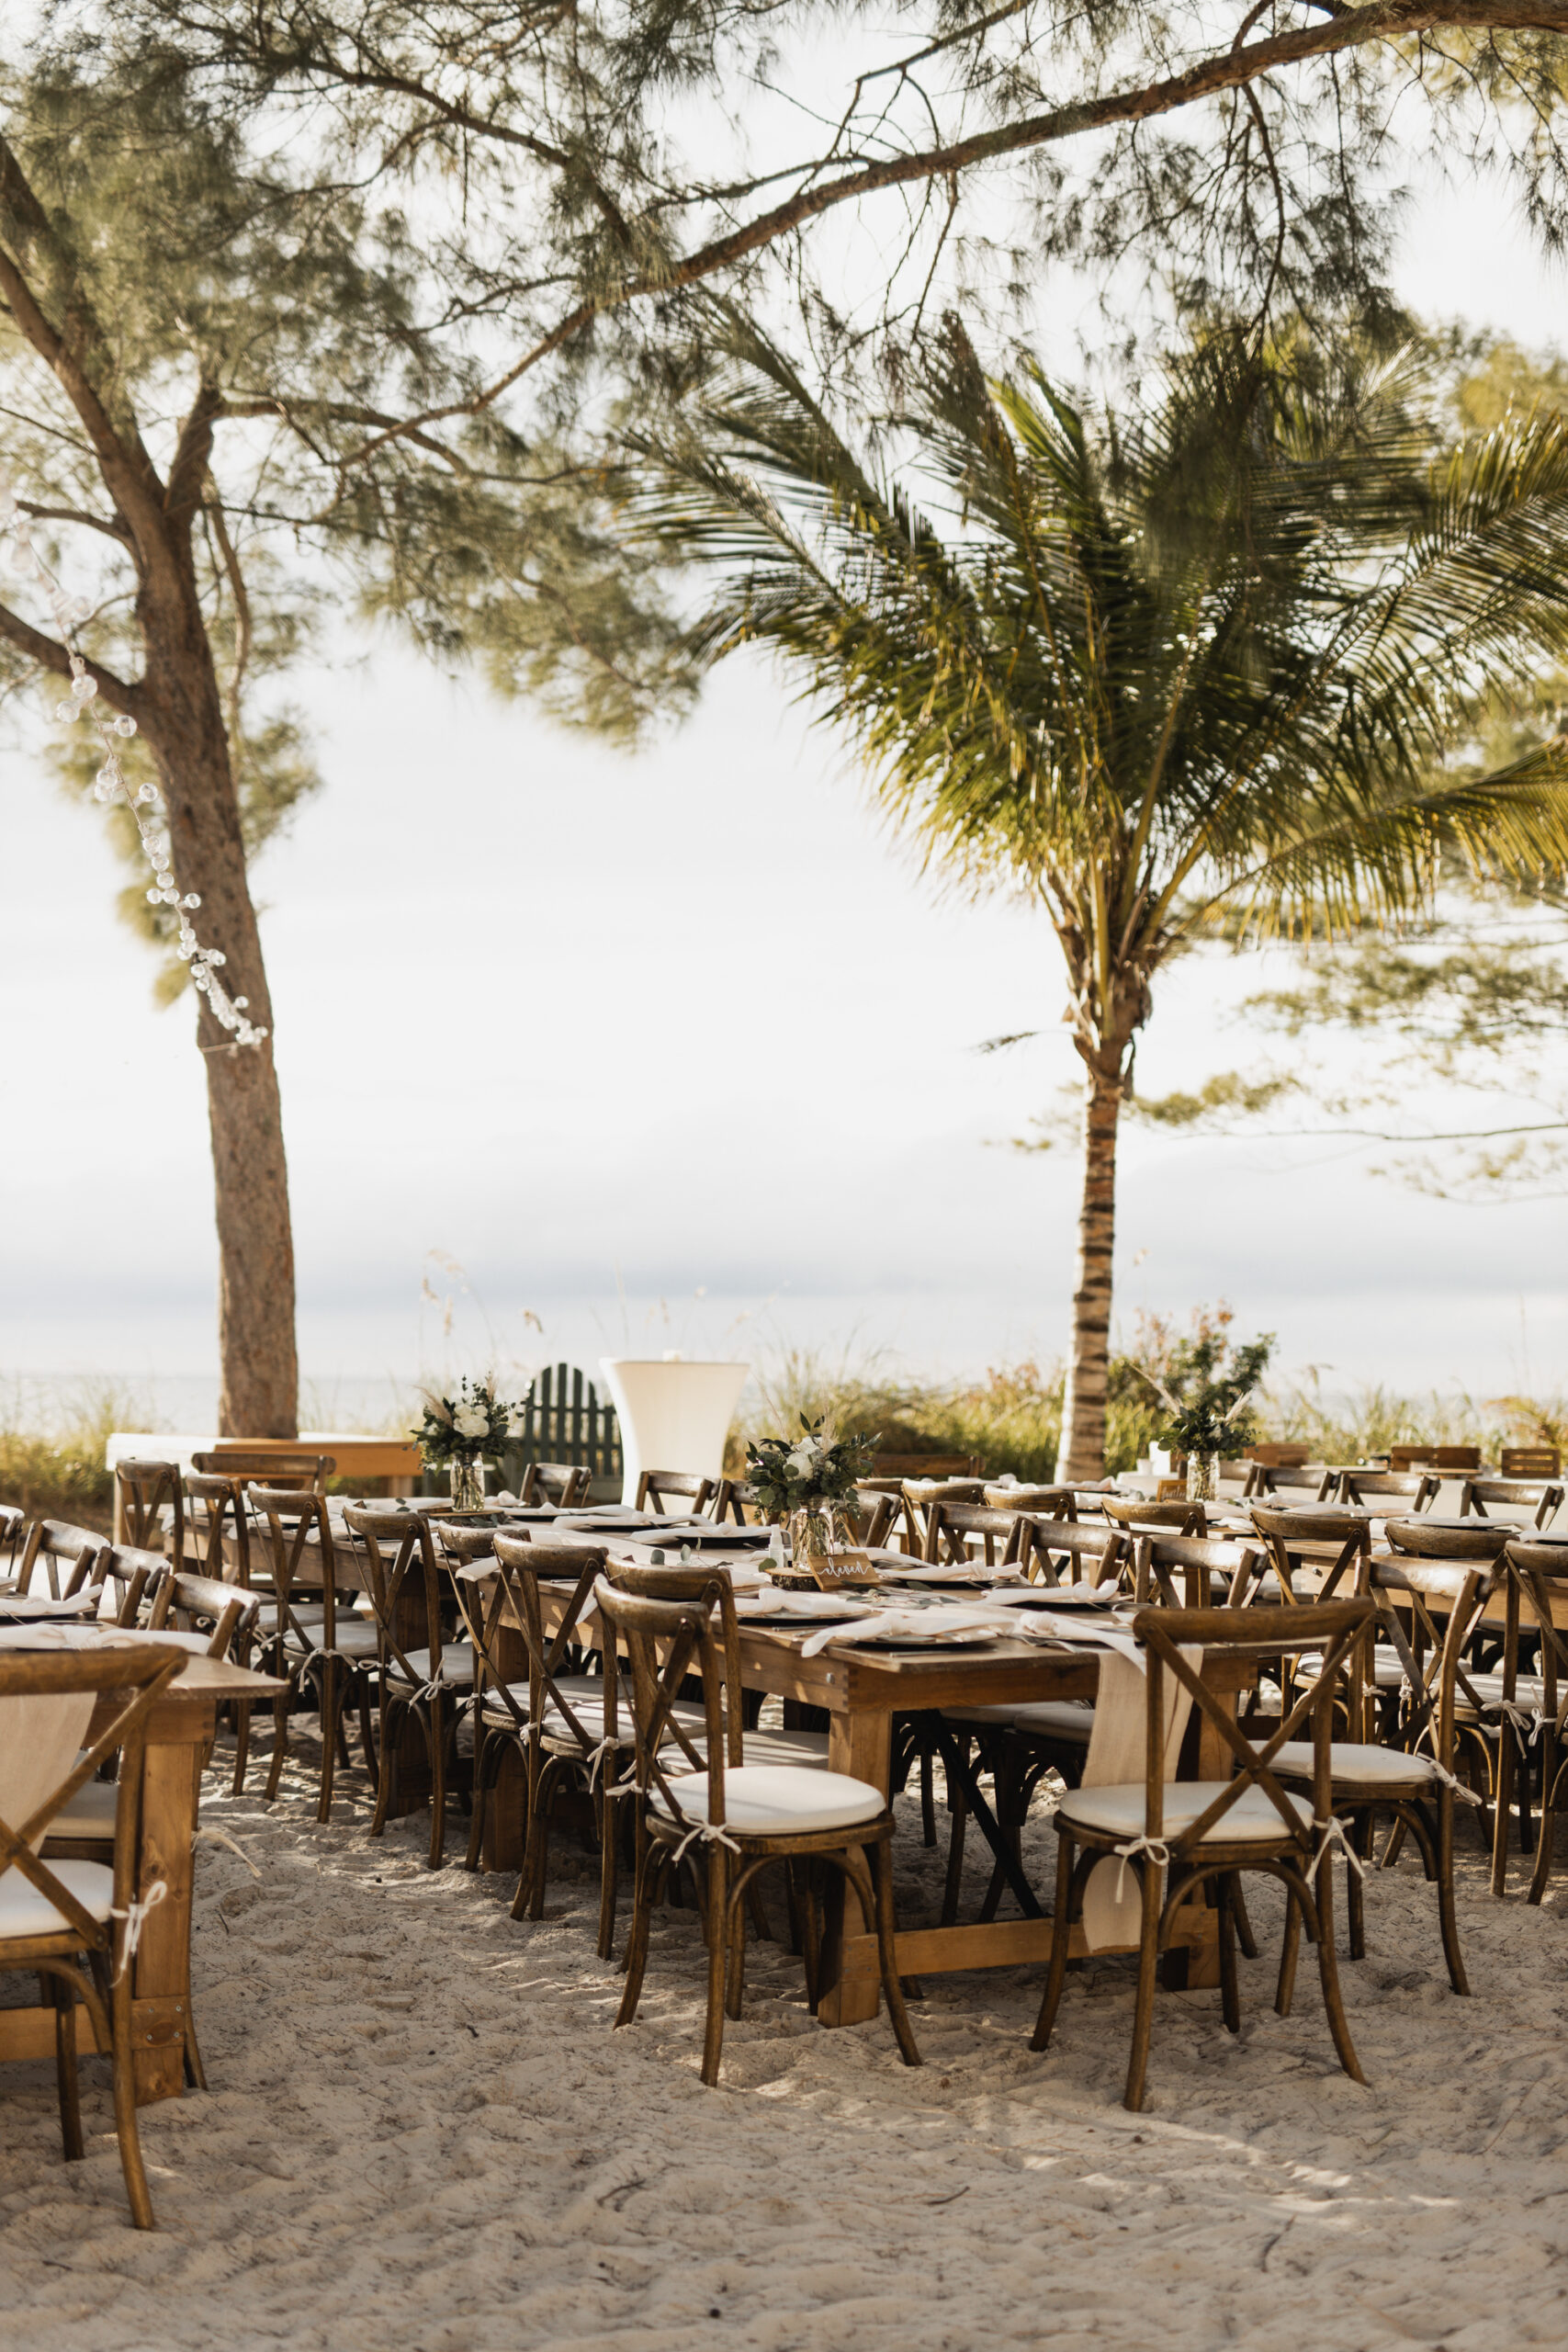 Rustic Beach Wedding Reception Ideas | Crossback Wooden Chairs | Tampa Bay Rental Gabro Event Services | Treasure Island Caterer Amici's Catered Cuisine